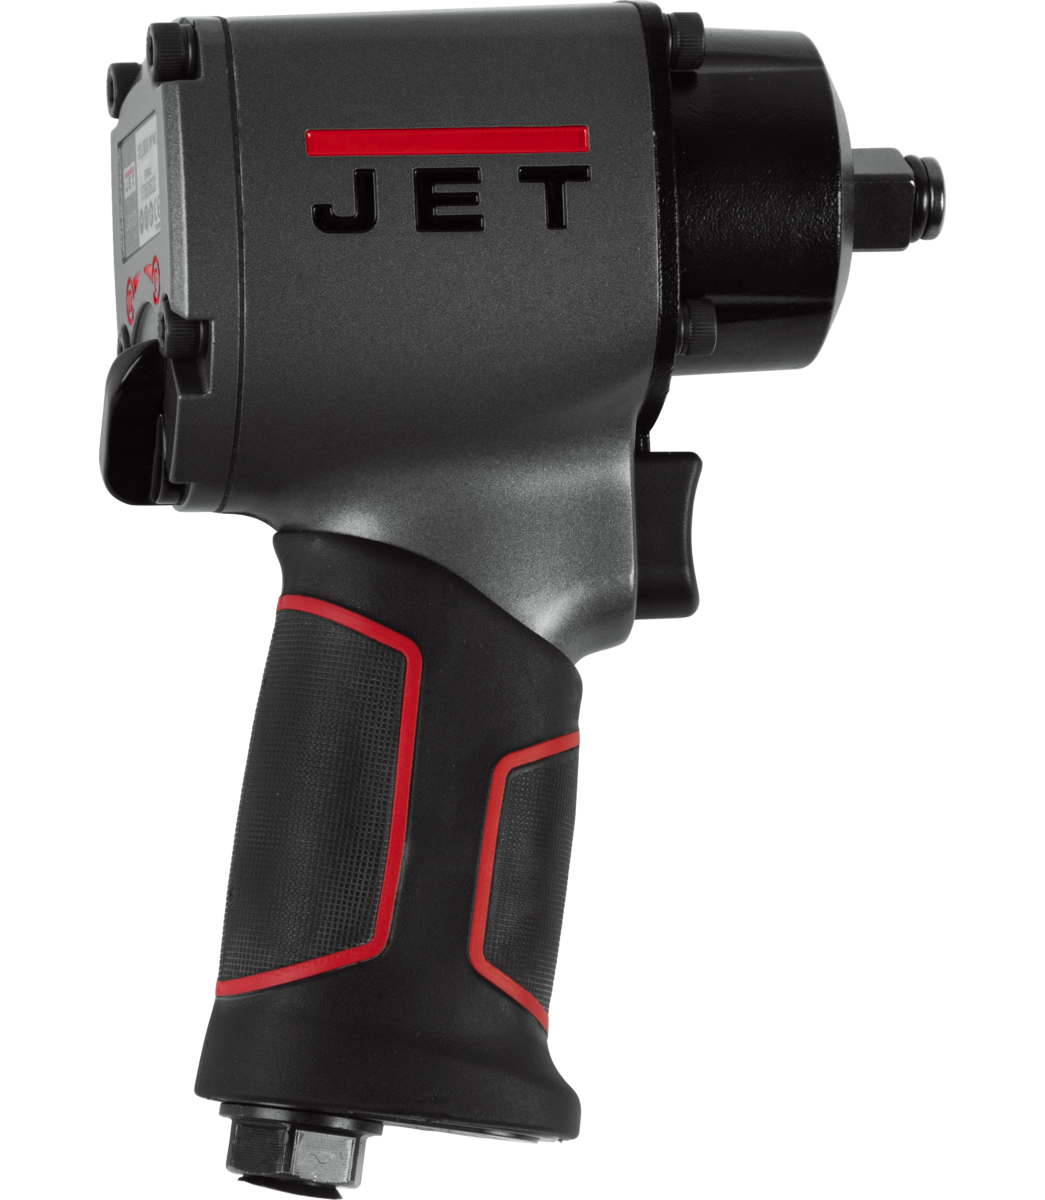 JET 1/2" Compact Impact Wrench